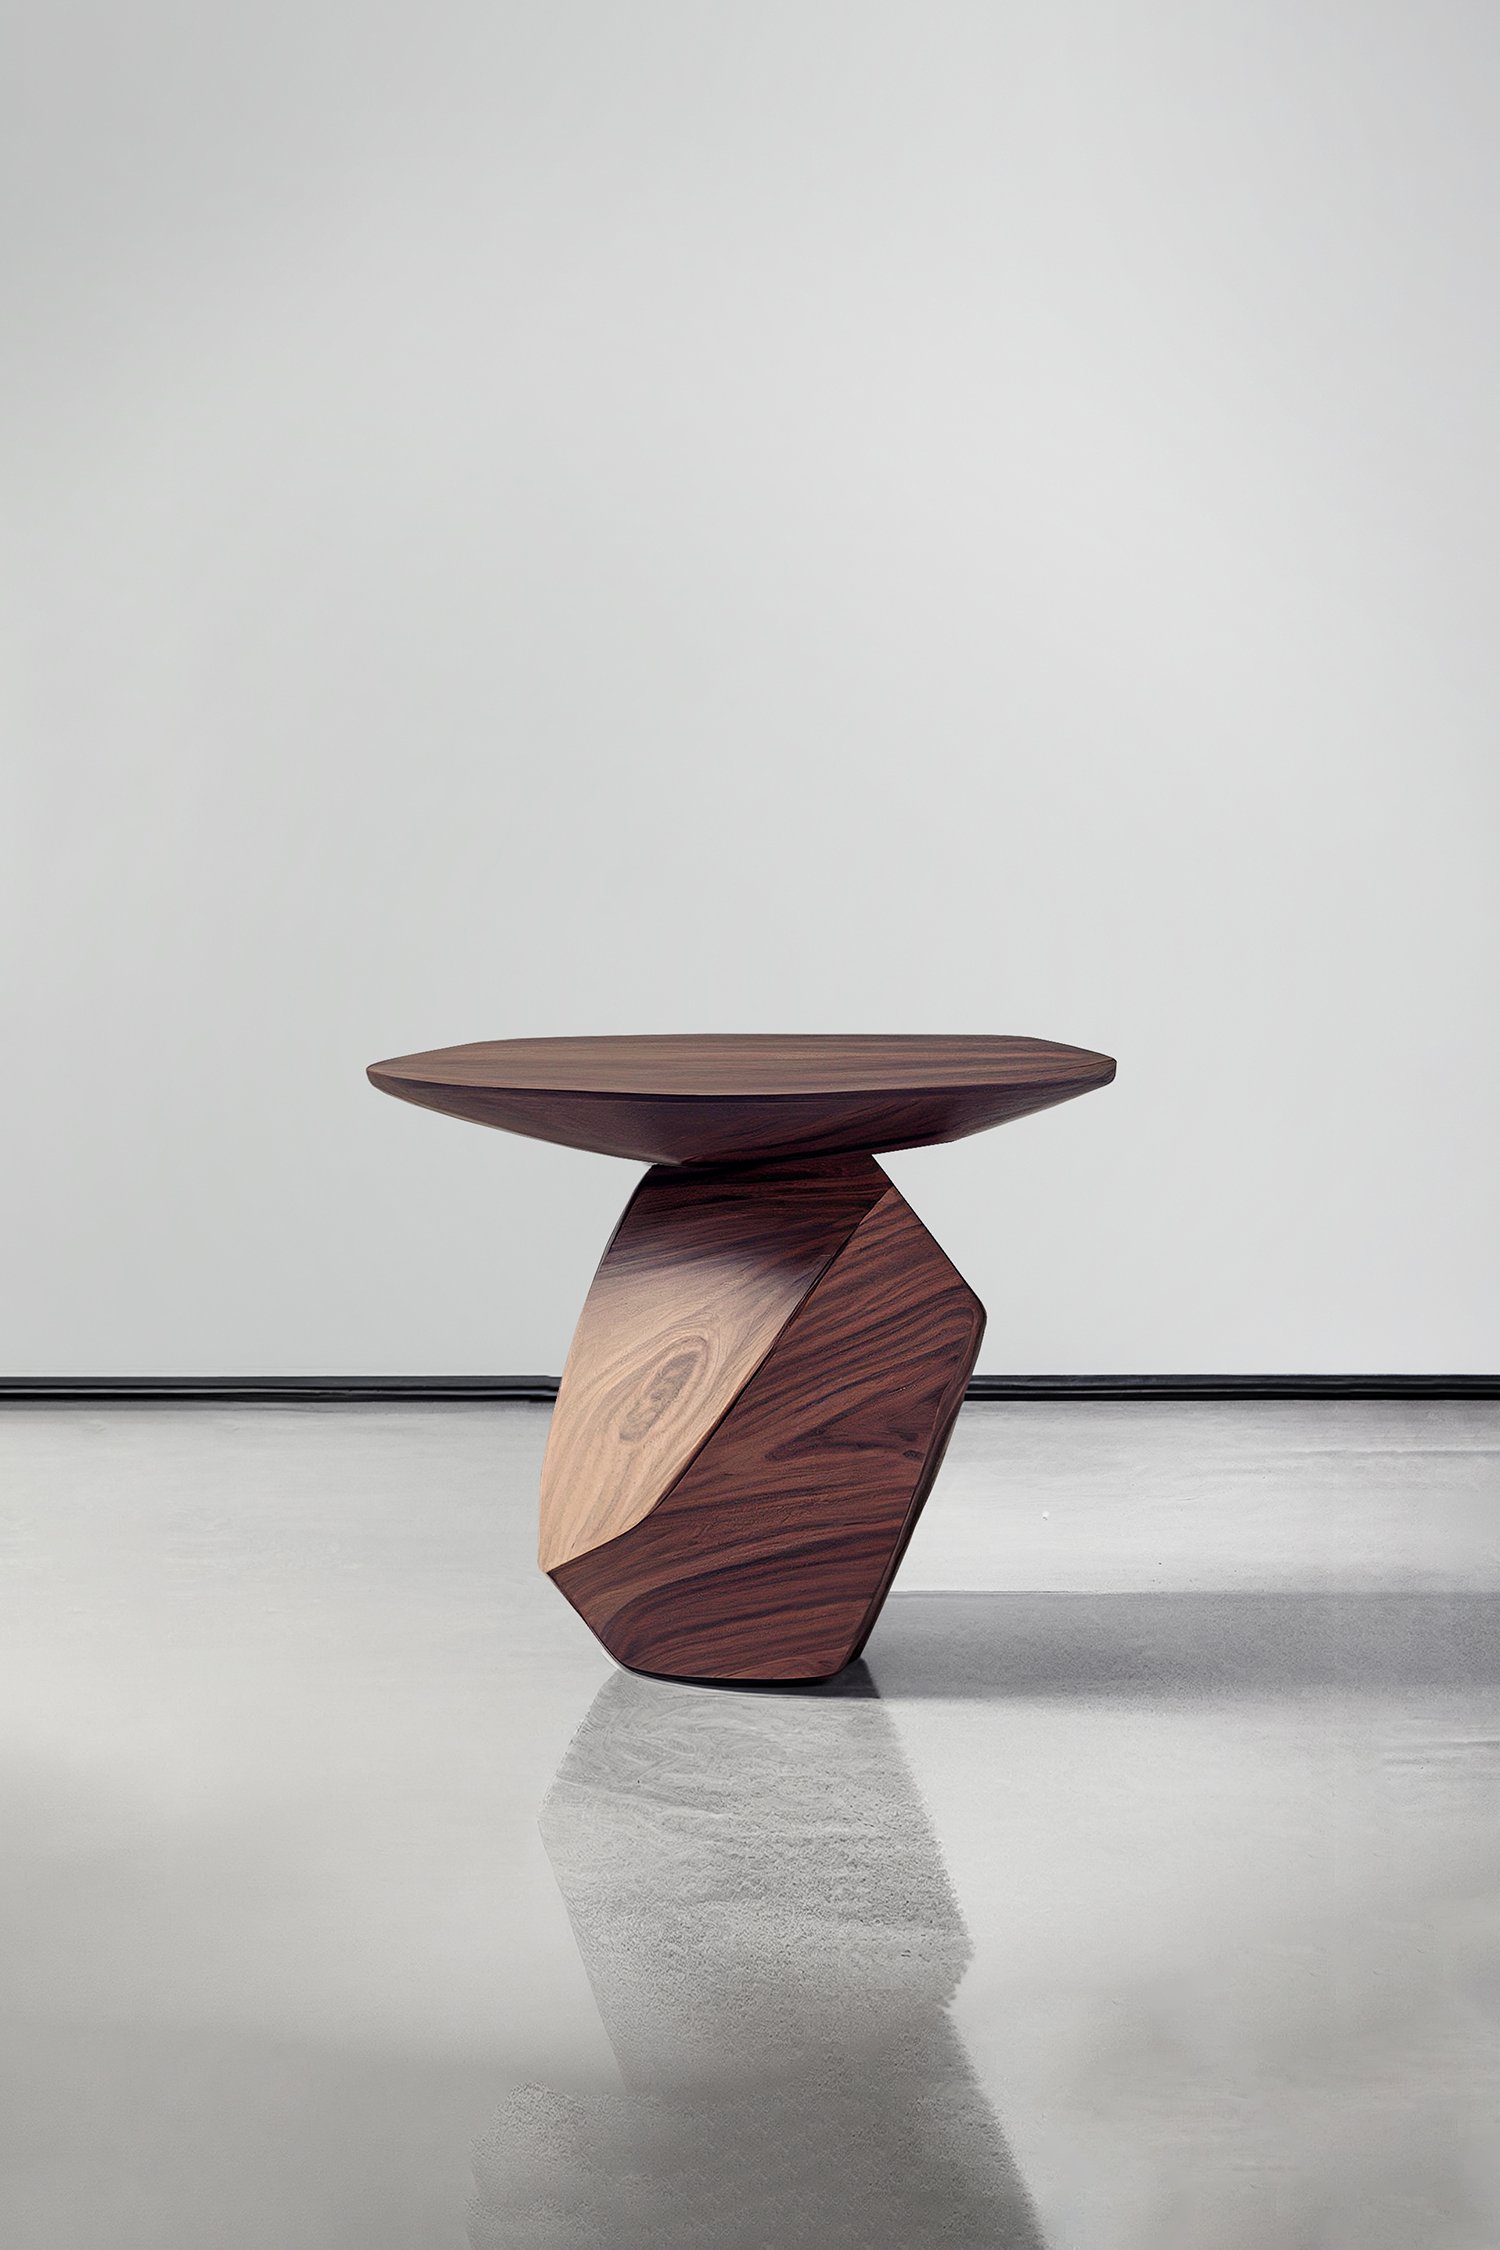 Sculptural Side Table Made of Solid Walnut Wood Solace S3 by Joel Escalona — 4.jpg